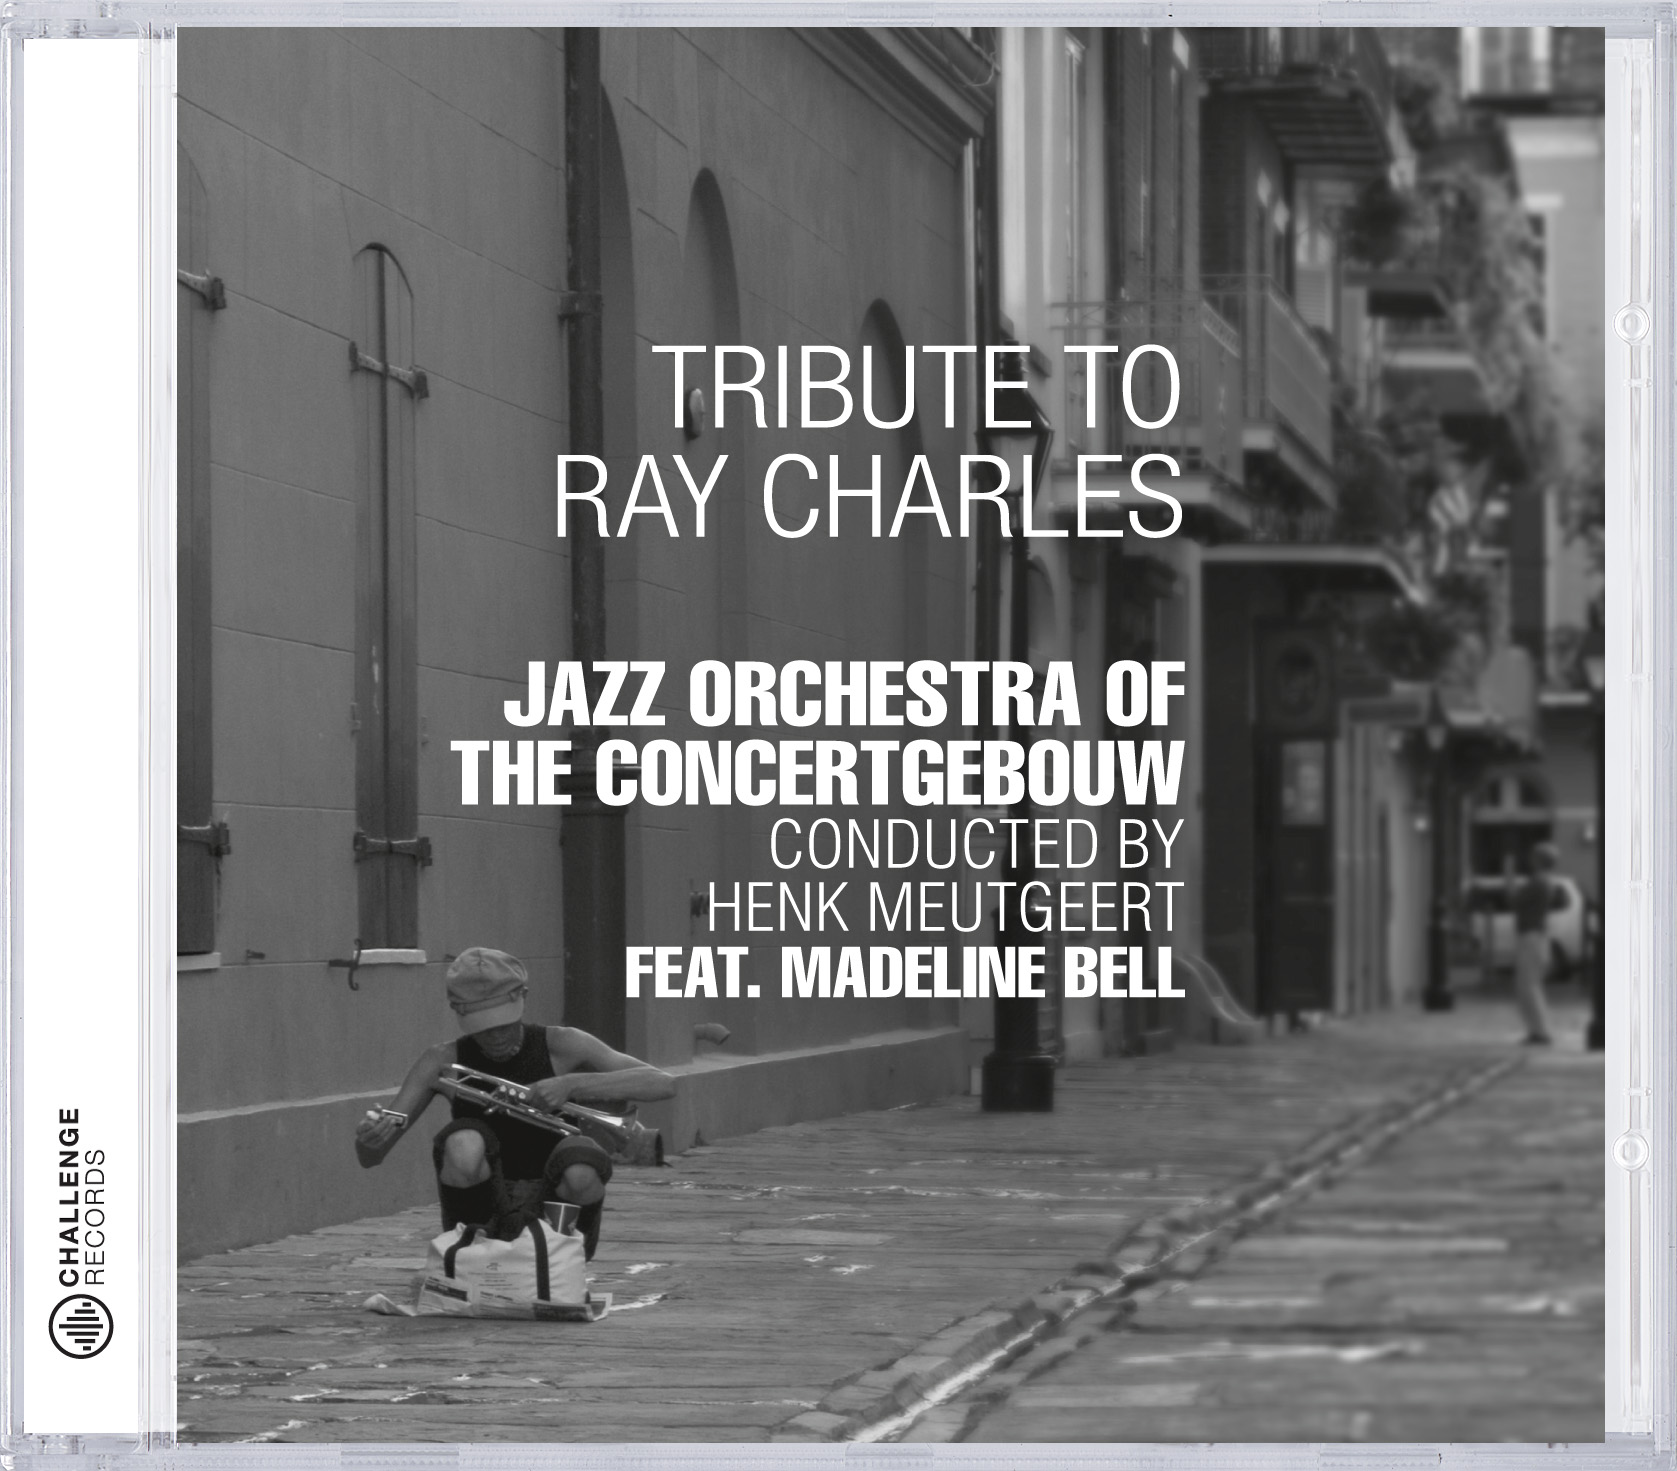 JAZZ ORCHESTRA OF THE CONCERTGEBOUW - Tribute To Ray Charles cover 